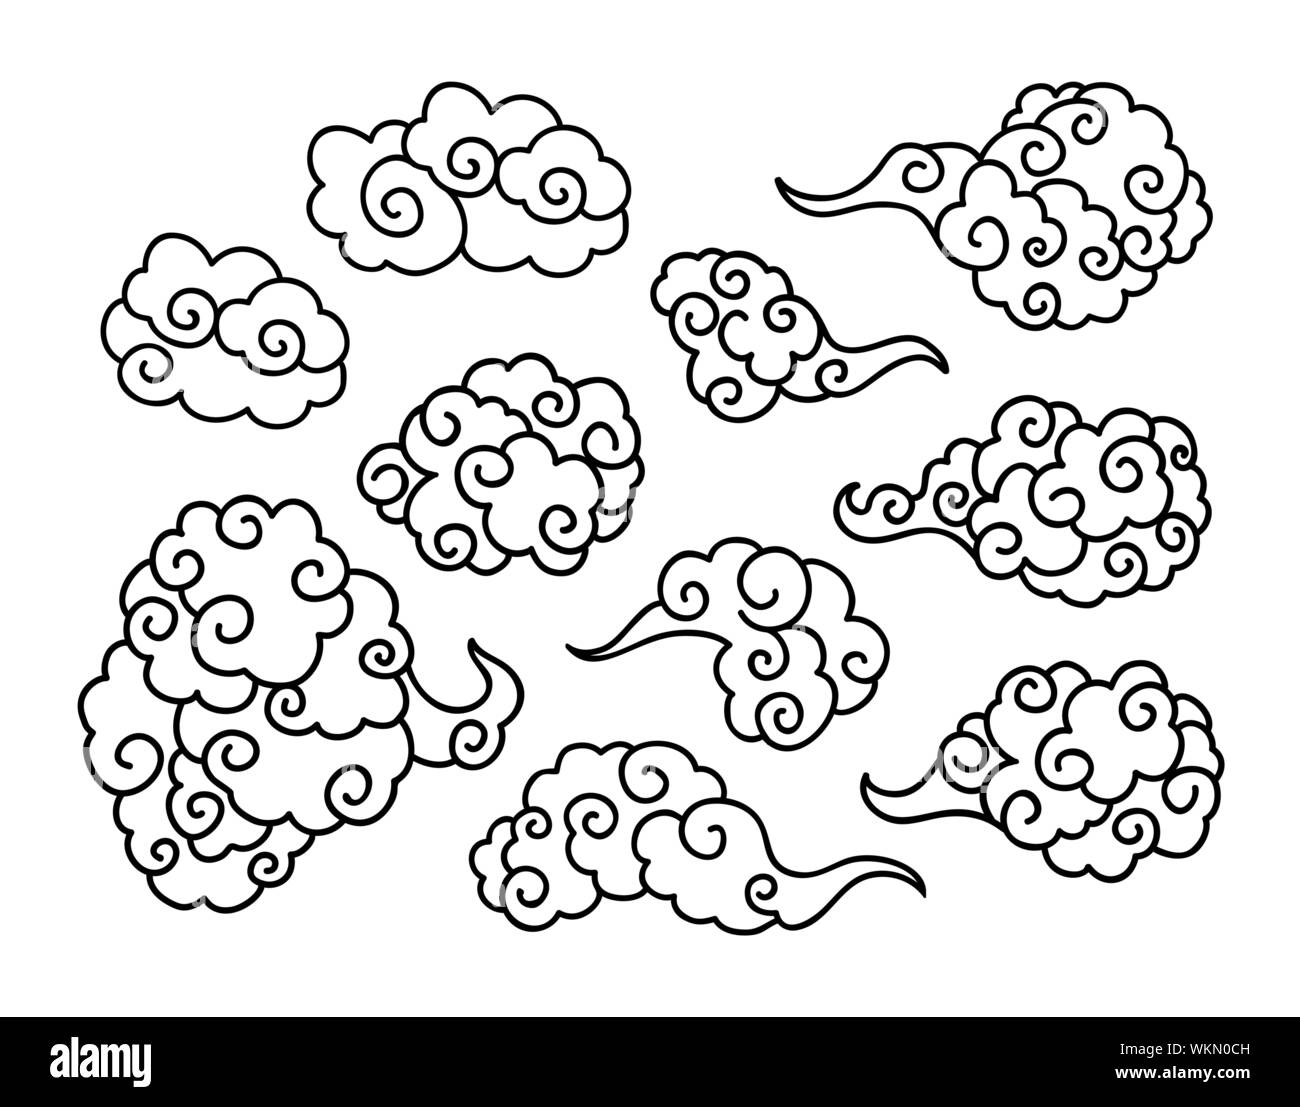 Black Clouds and wind blows hand drawn vector illustration. Smoke isolated clipart. Chinese art abstract drawing. Sketch clouds, overcloud set. Isolated design elements for SVG laser cutting files Stock Vector